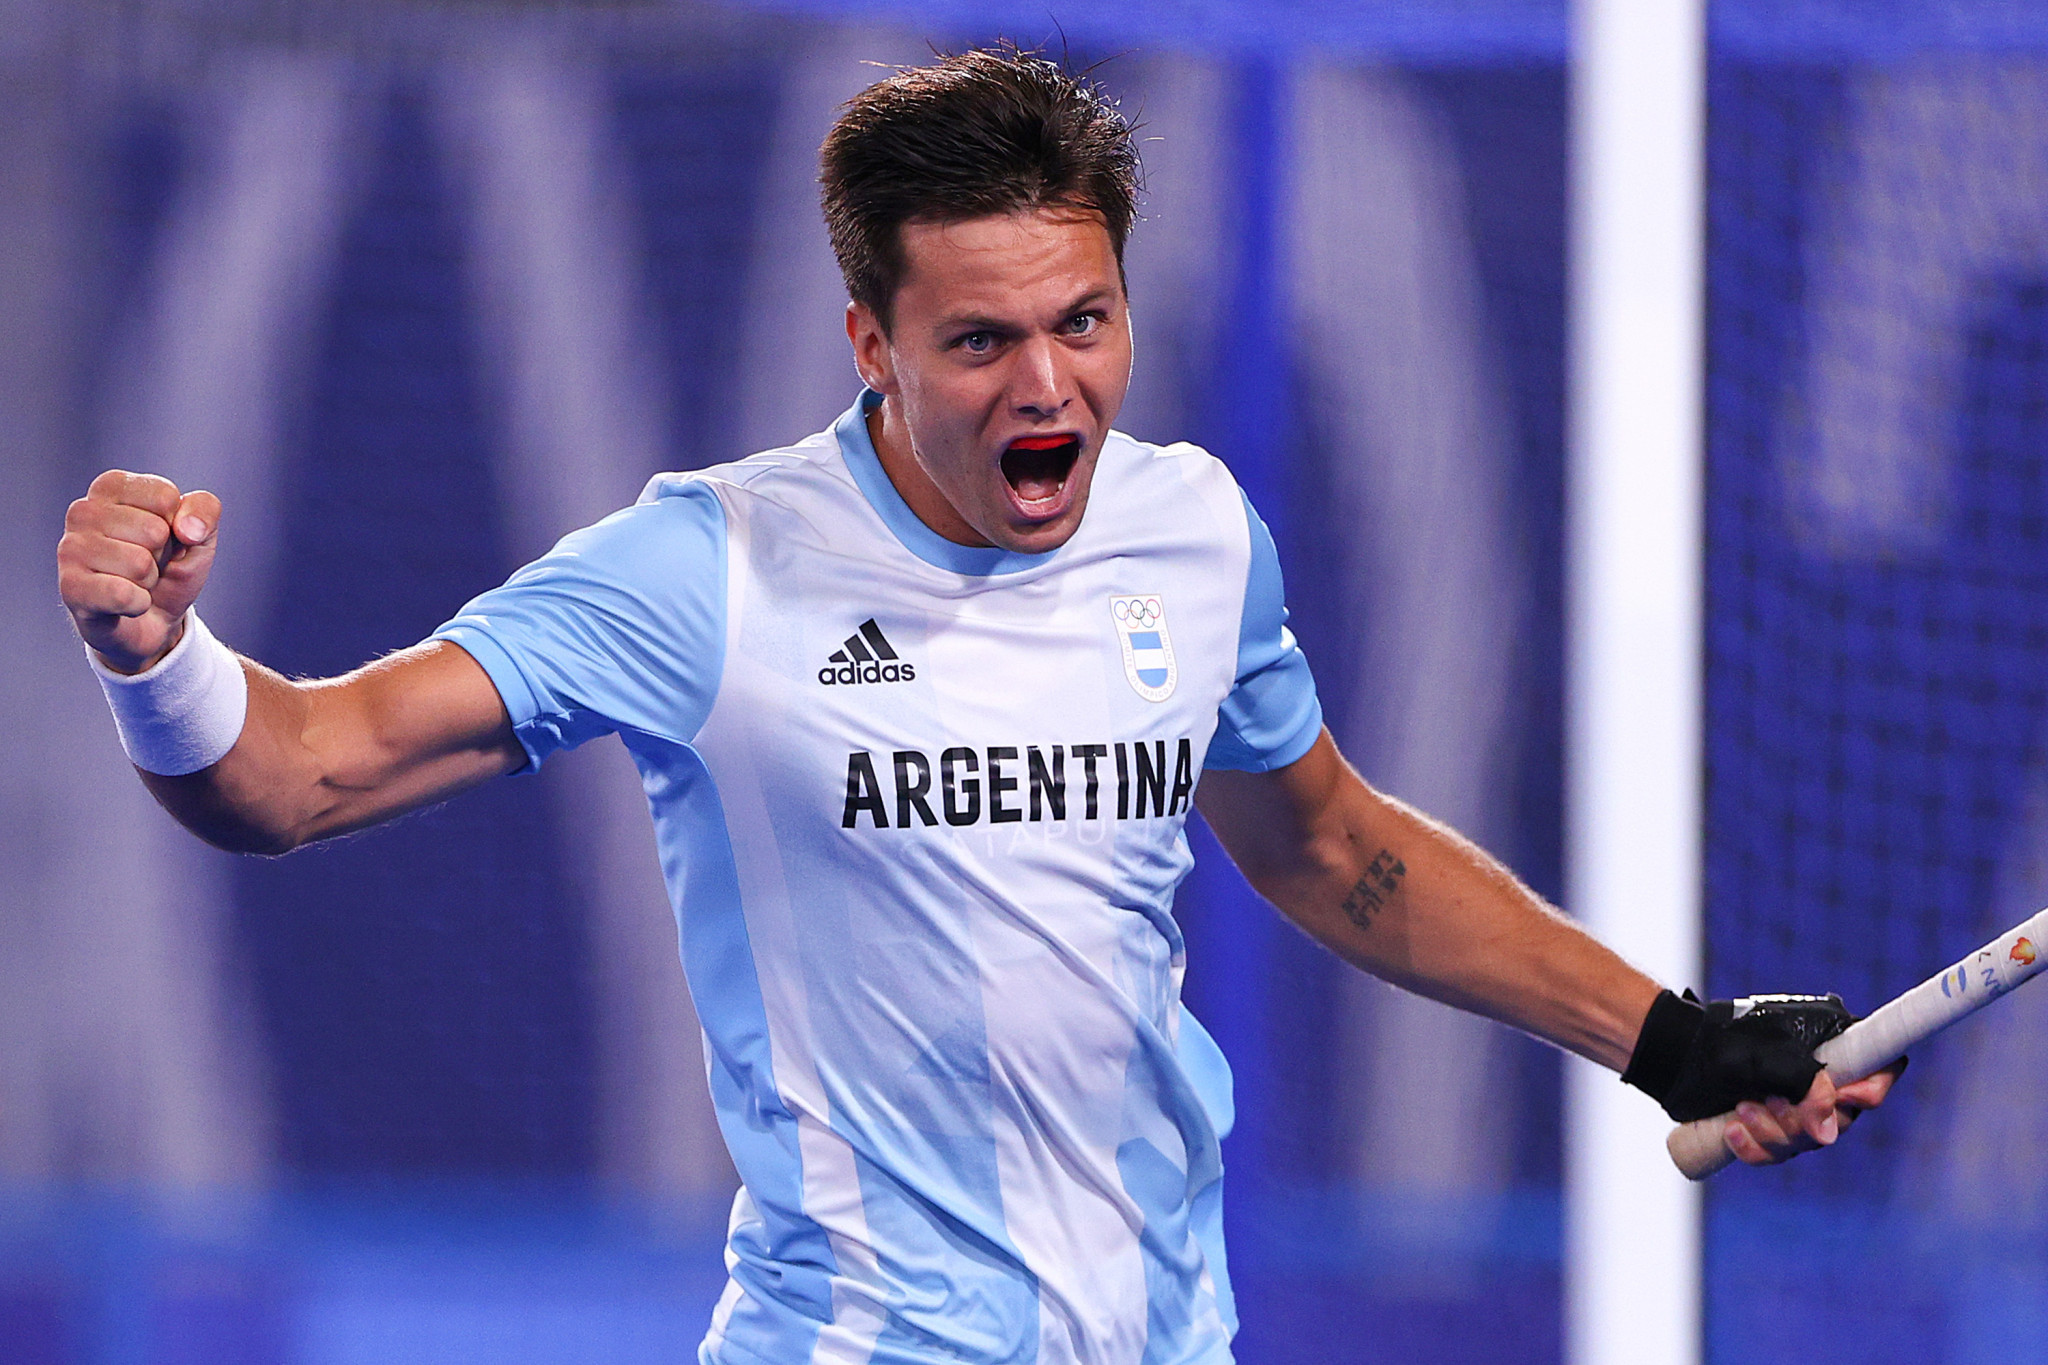 Argentina see off India in shoot-out victory in men's Hockey Pro League